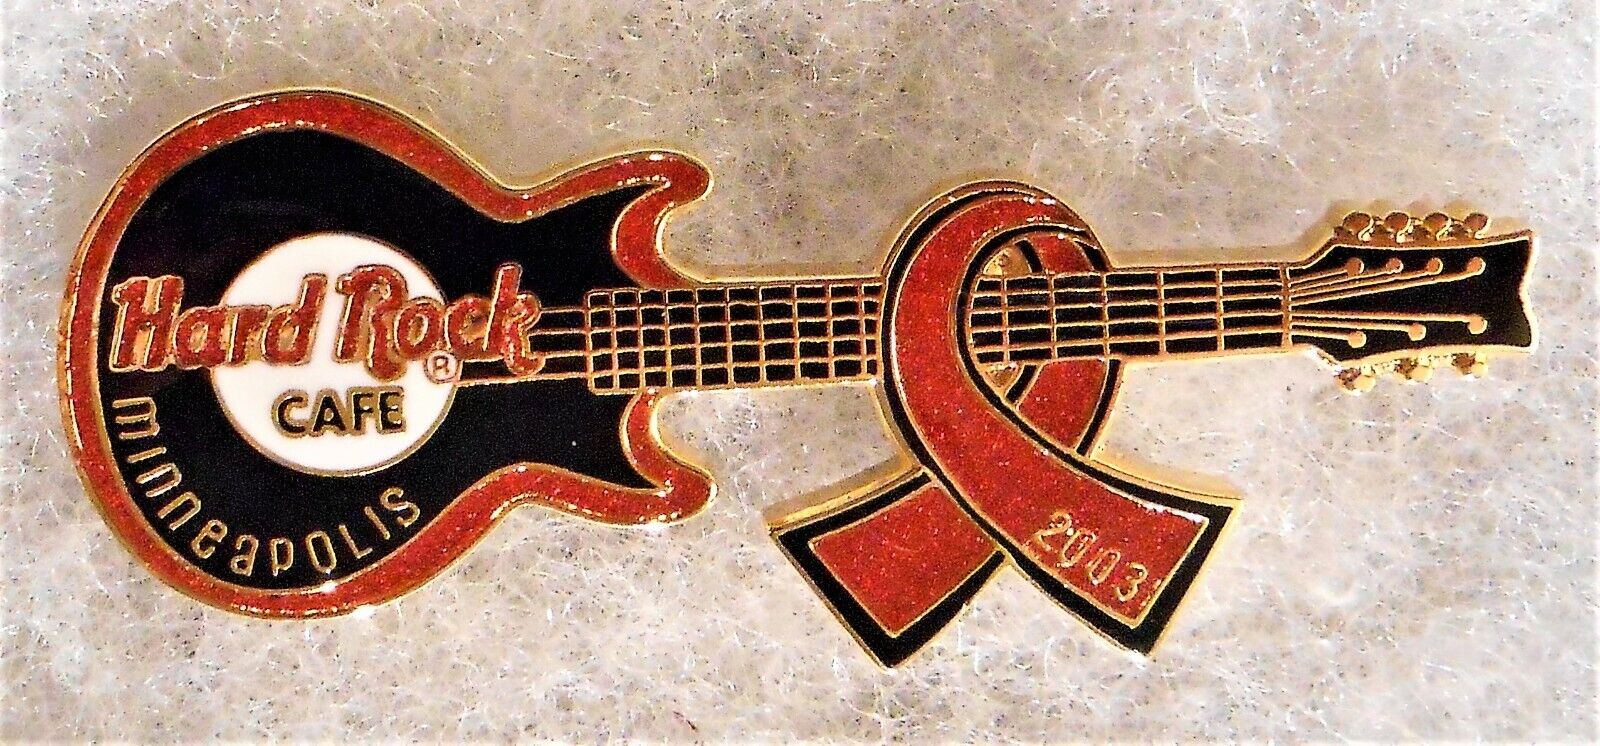 HARD ROCK CAFE MINNEAPOLIS AIDS WALK CHARITY GUITAR WITH RED RIBBON PIN # 17813